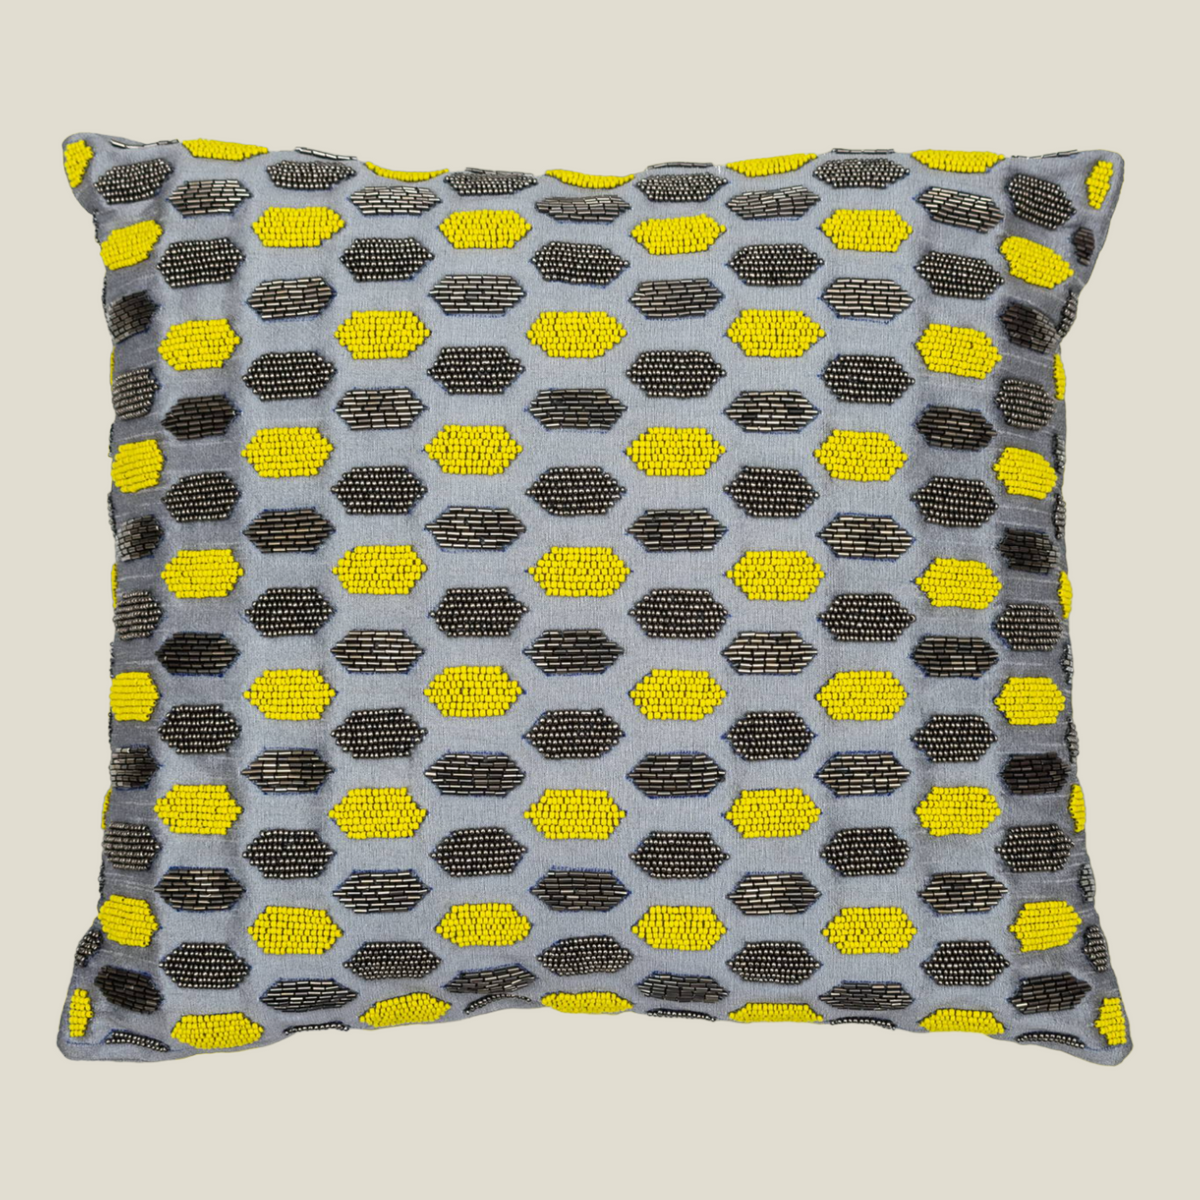 The Luxelife Handcrafted Grey Cushion Cover